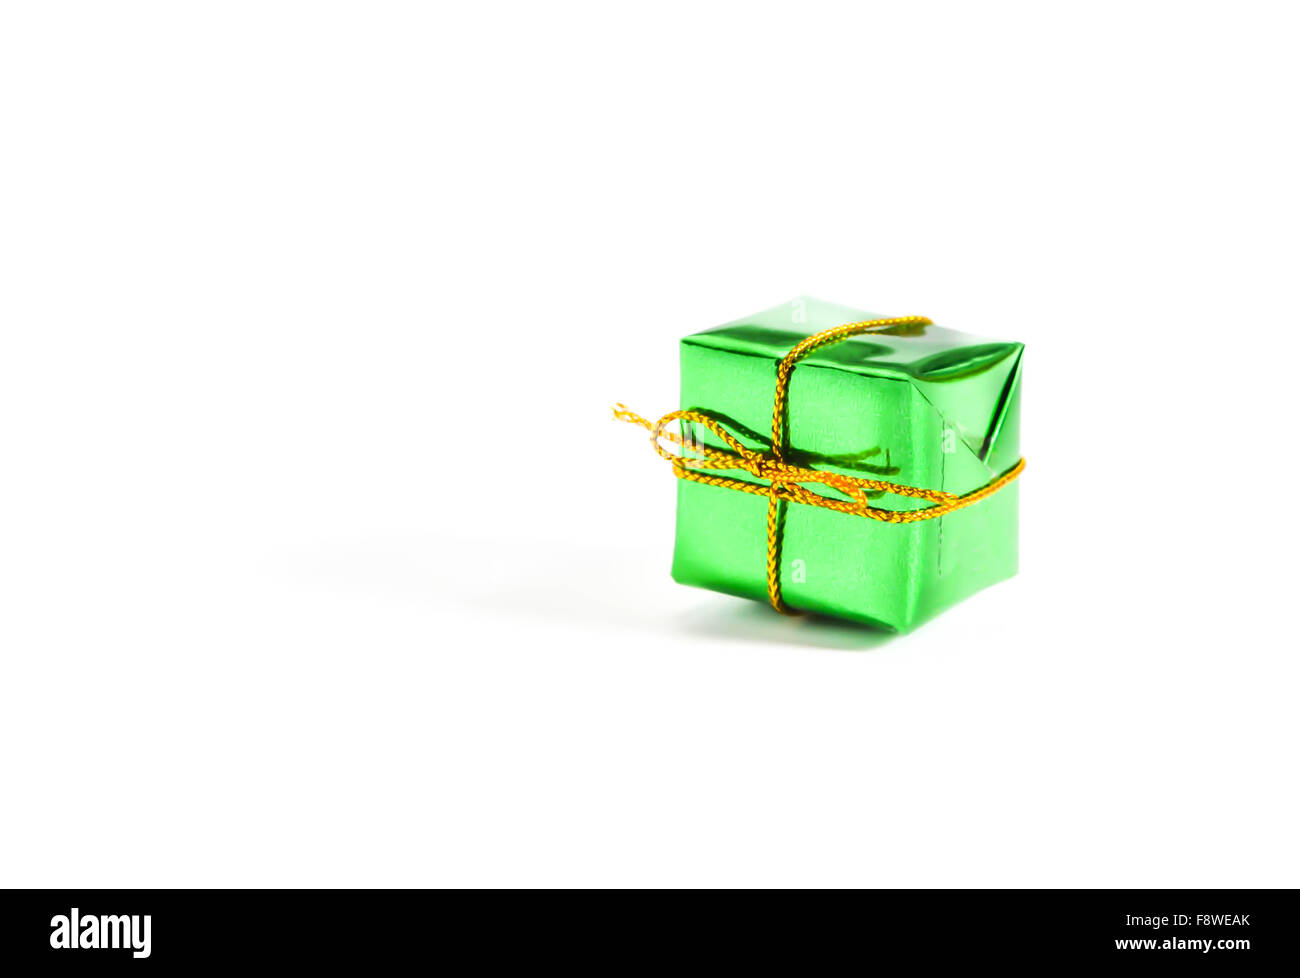 green color gift box on white background Stock Photo